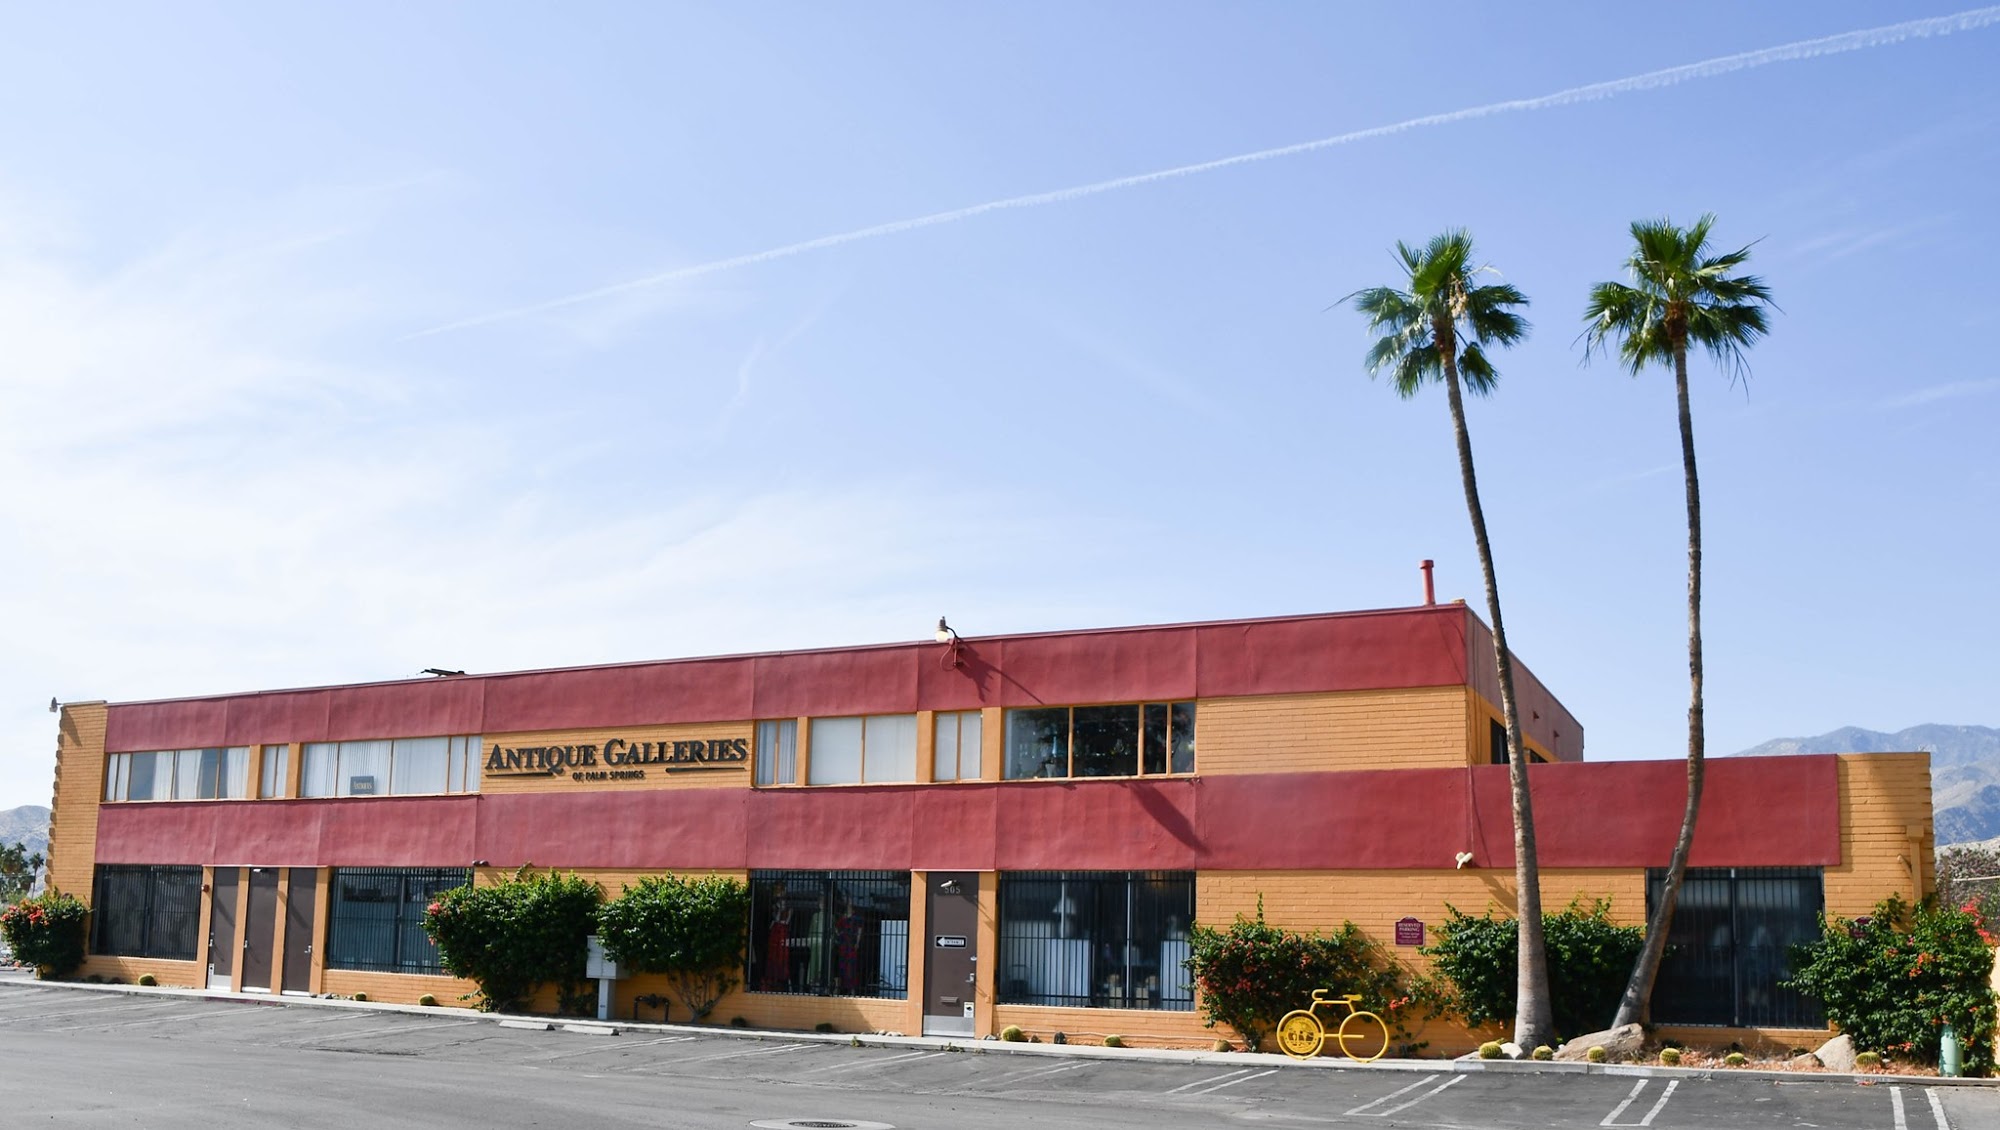 Antique Galleries of Palm Springs